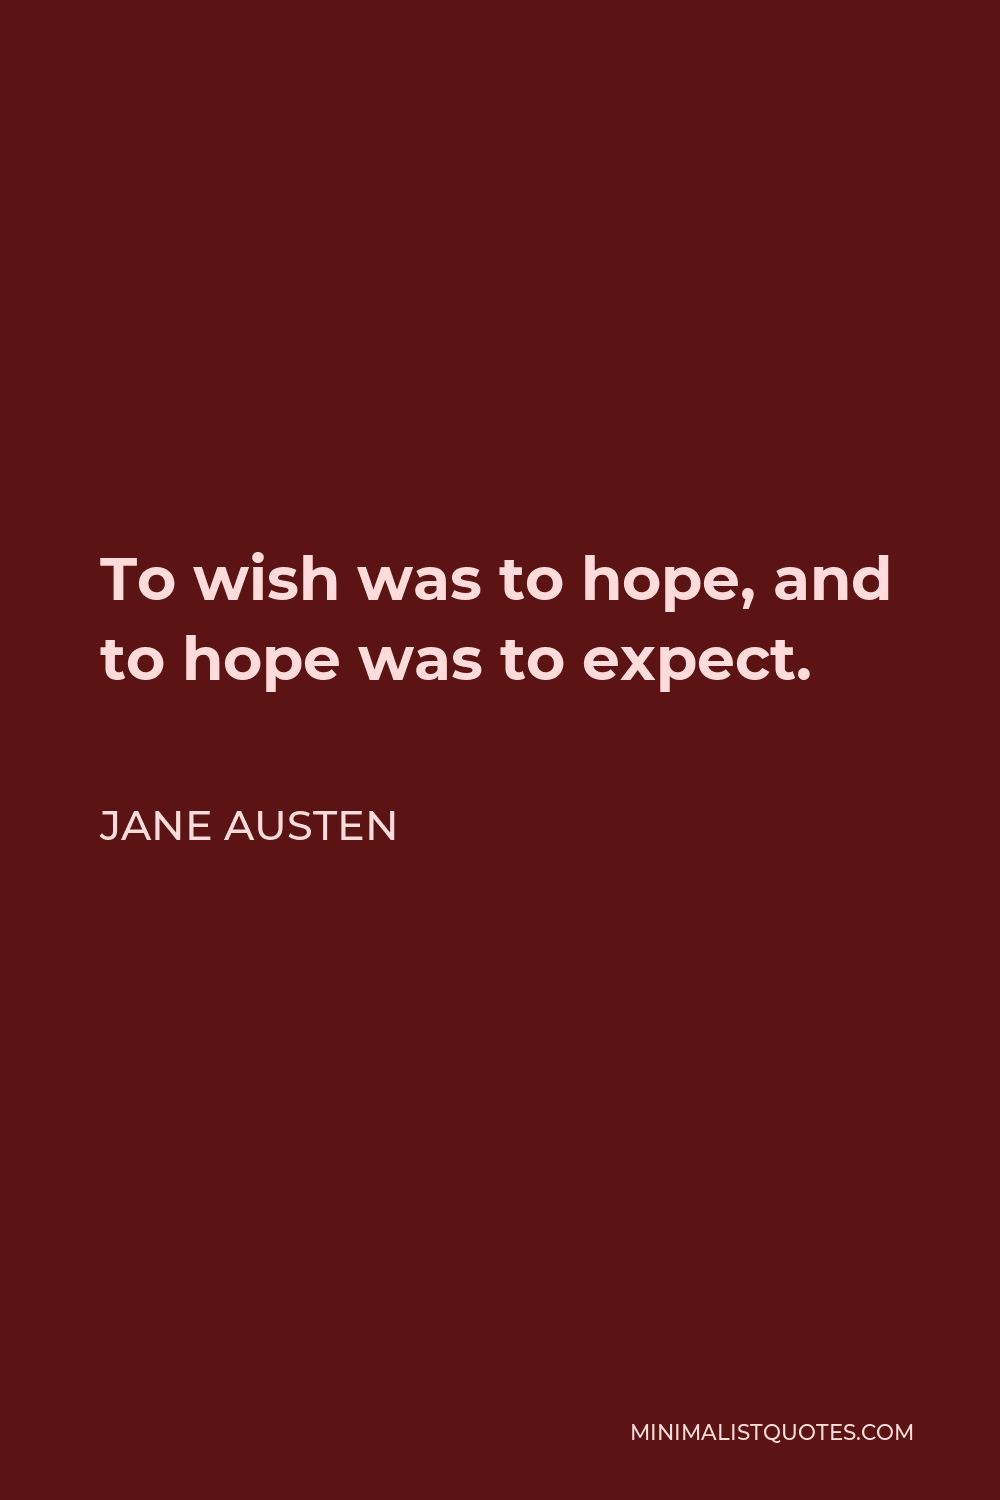 Jane Austen Quote - To wish was to hope, and to hope was to expect.